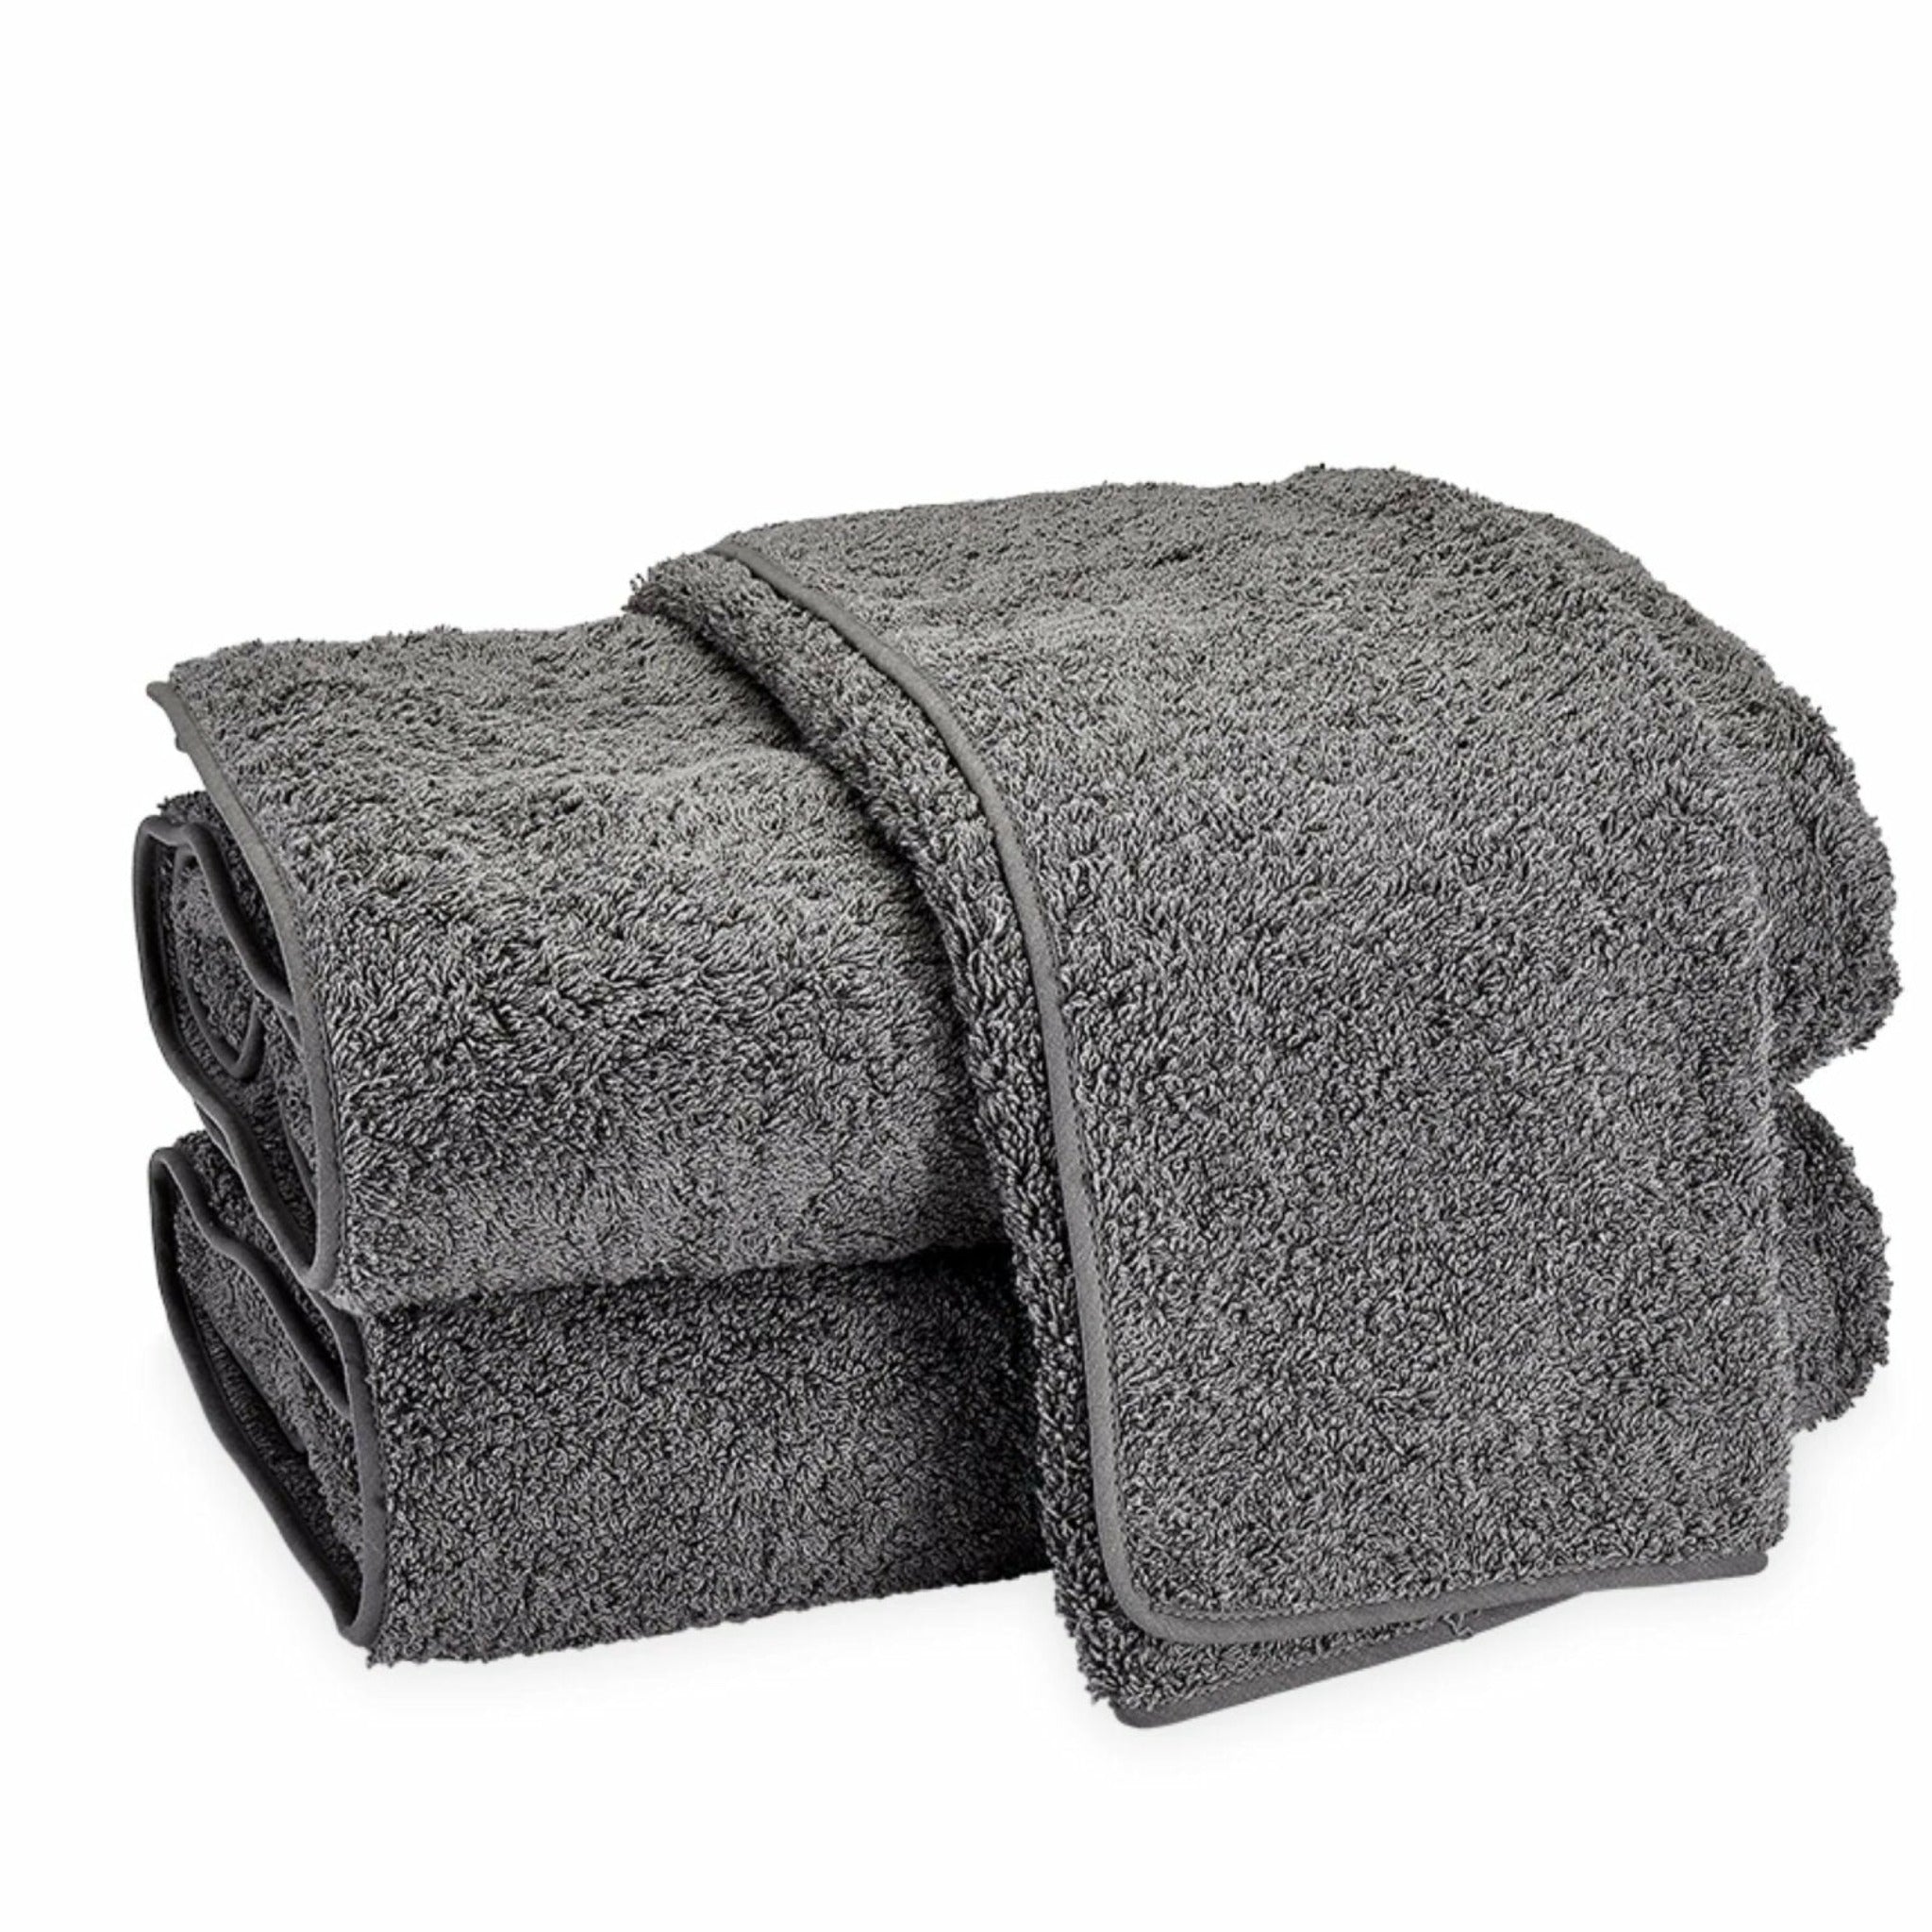 14 Best Bath Towels for Maximum Fluffiness and Warmth in 2021